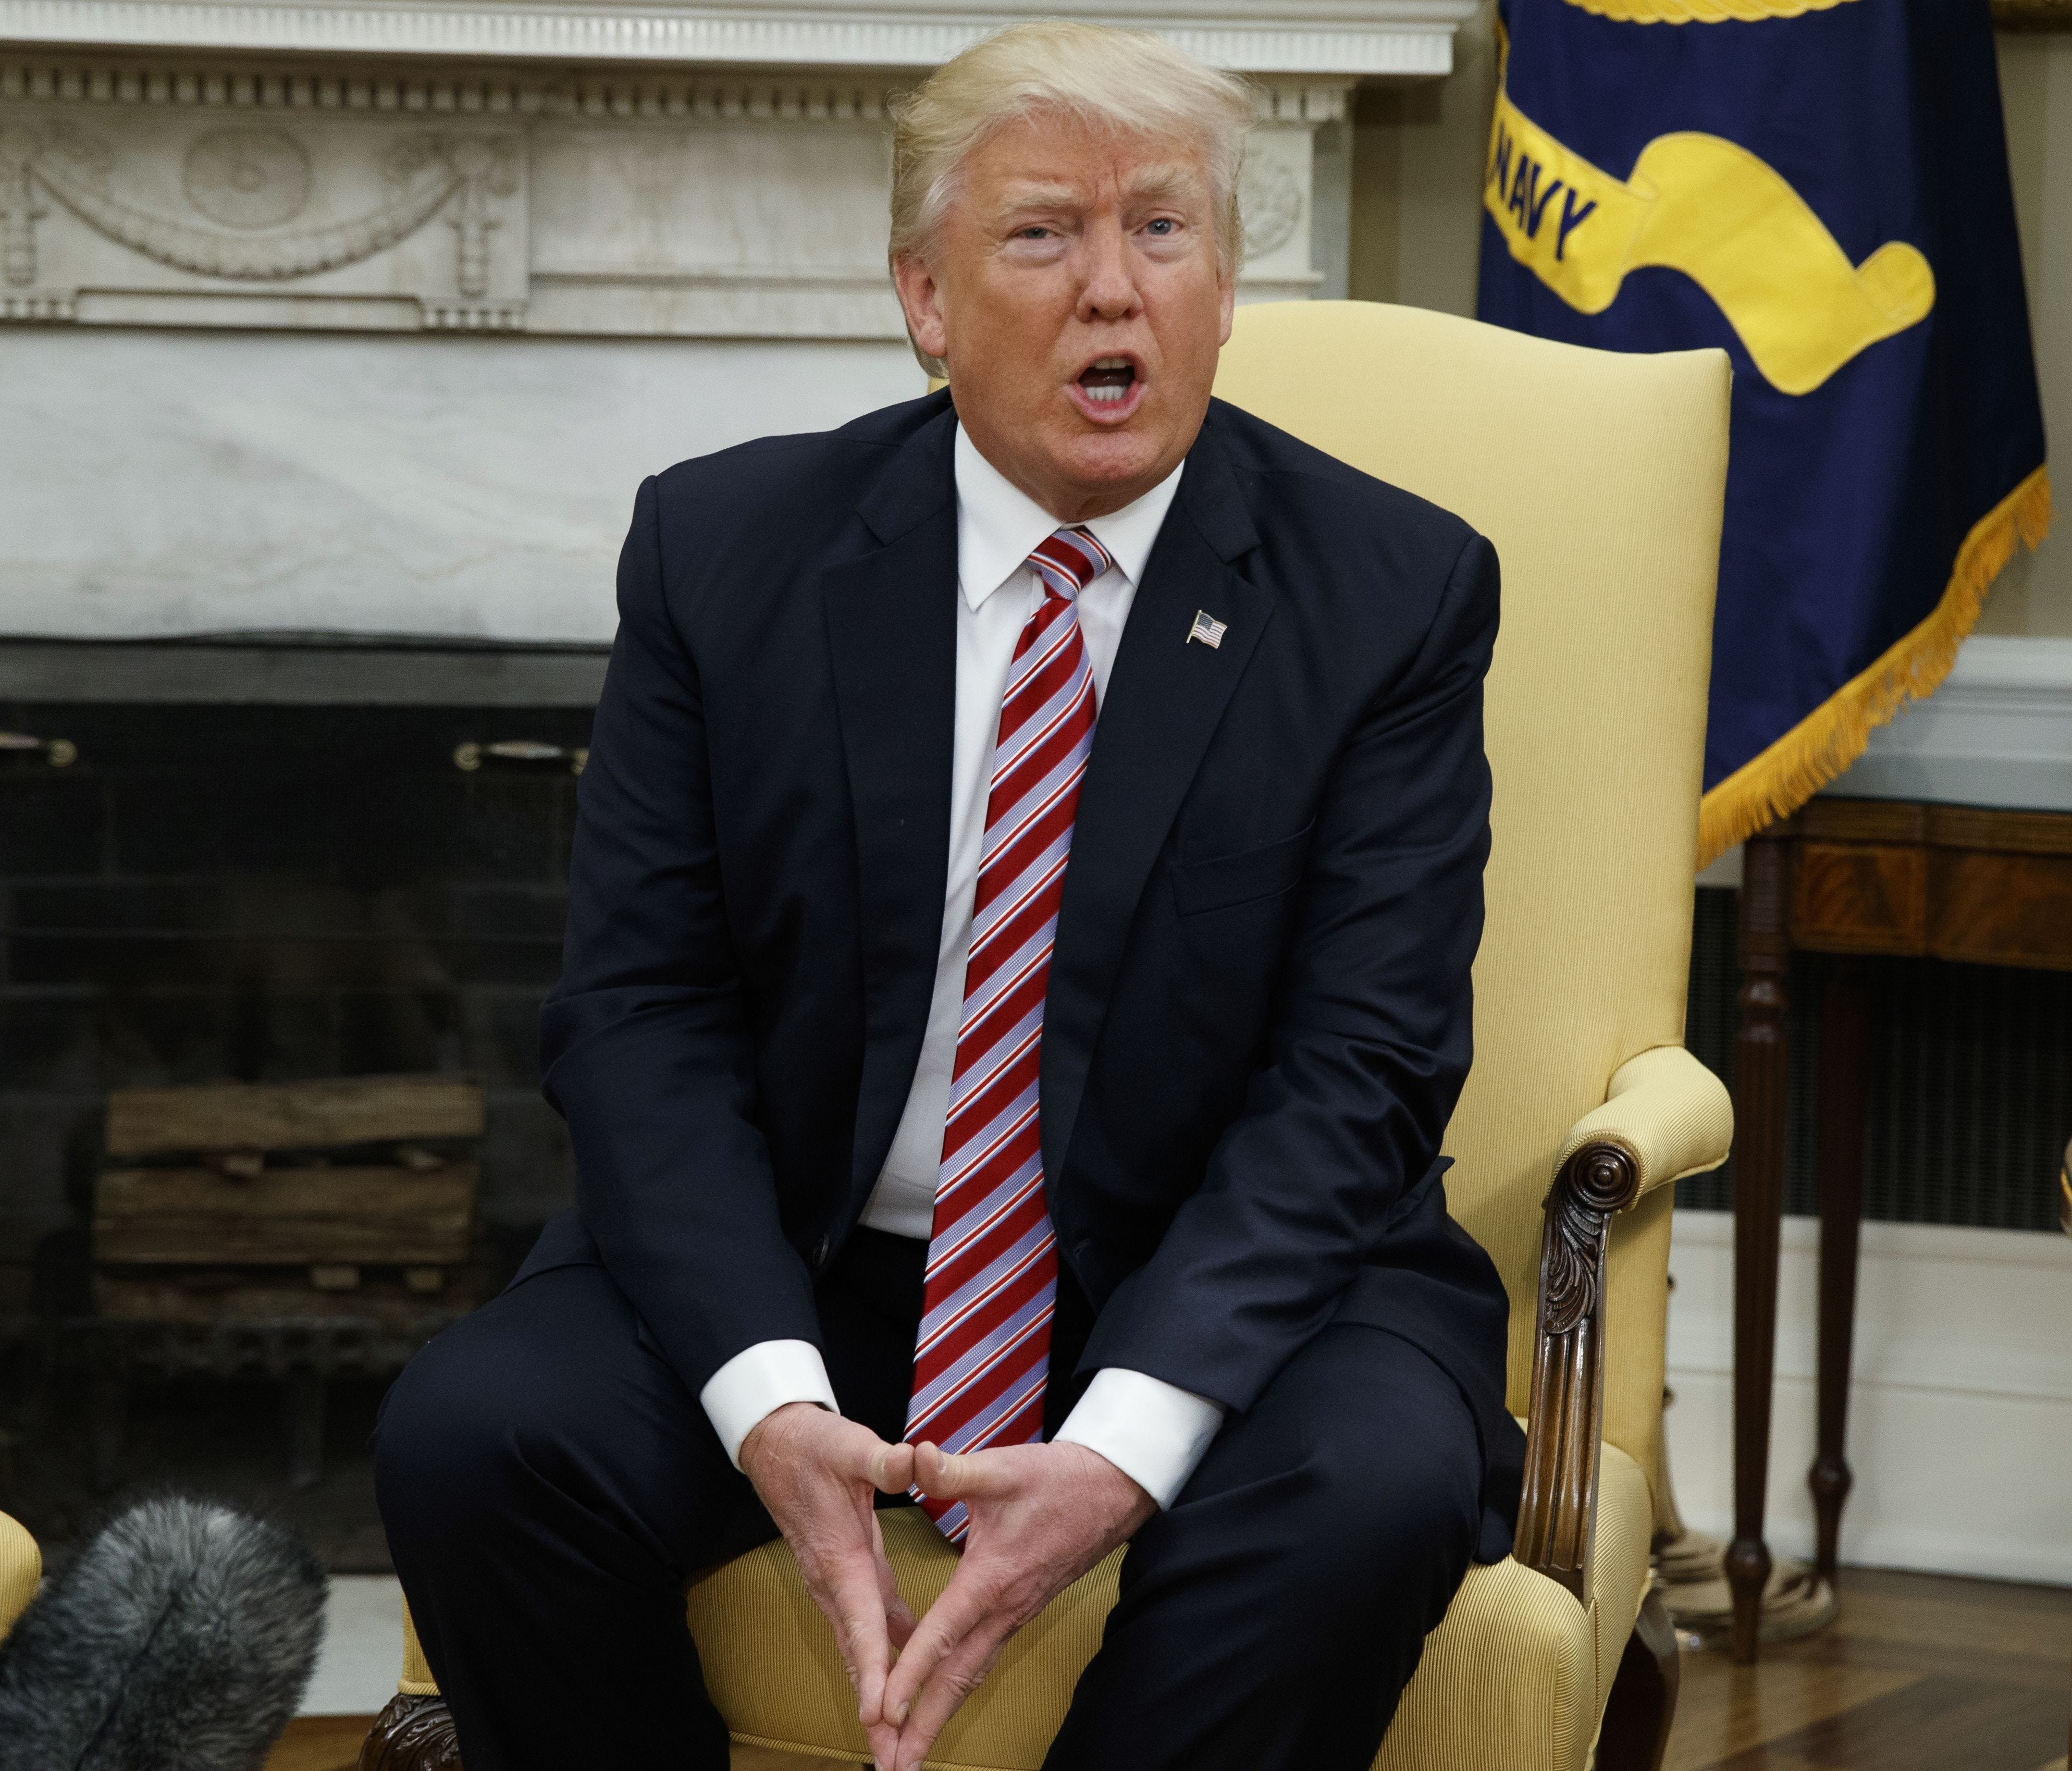 President Trump talks to reporters during a meeting with Henry Kissinger in the Oval Office on May 10, 2017.